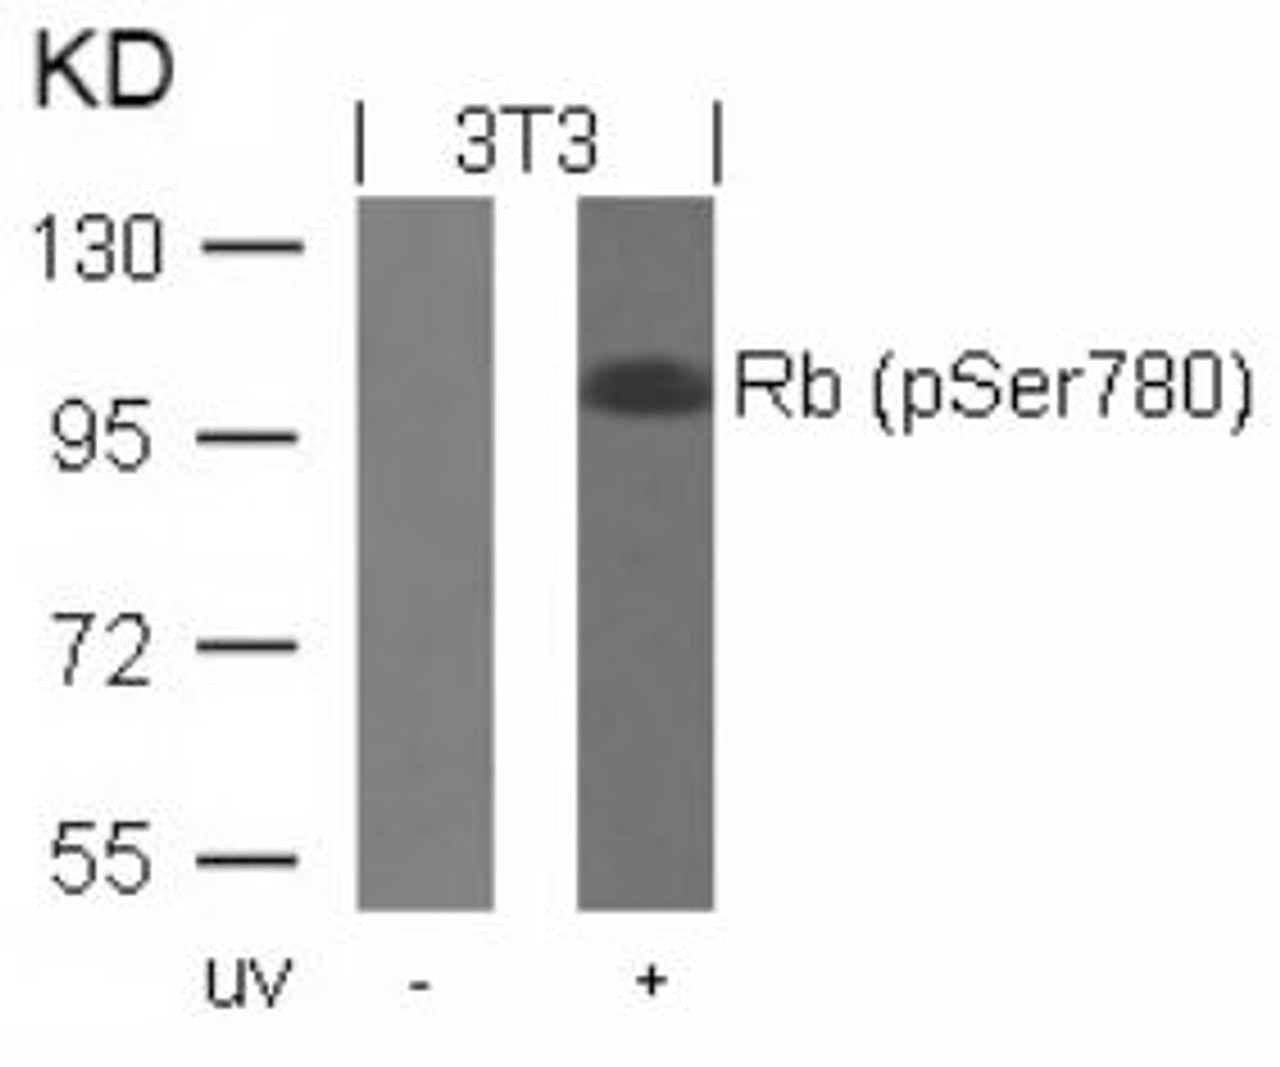 Western blot analysis of lysed extracts from 3T3 cells untreated or treated with UV using Rb (Phospho-Ser780) .